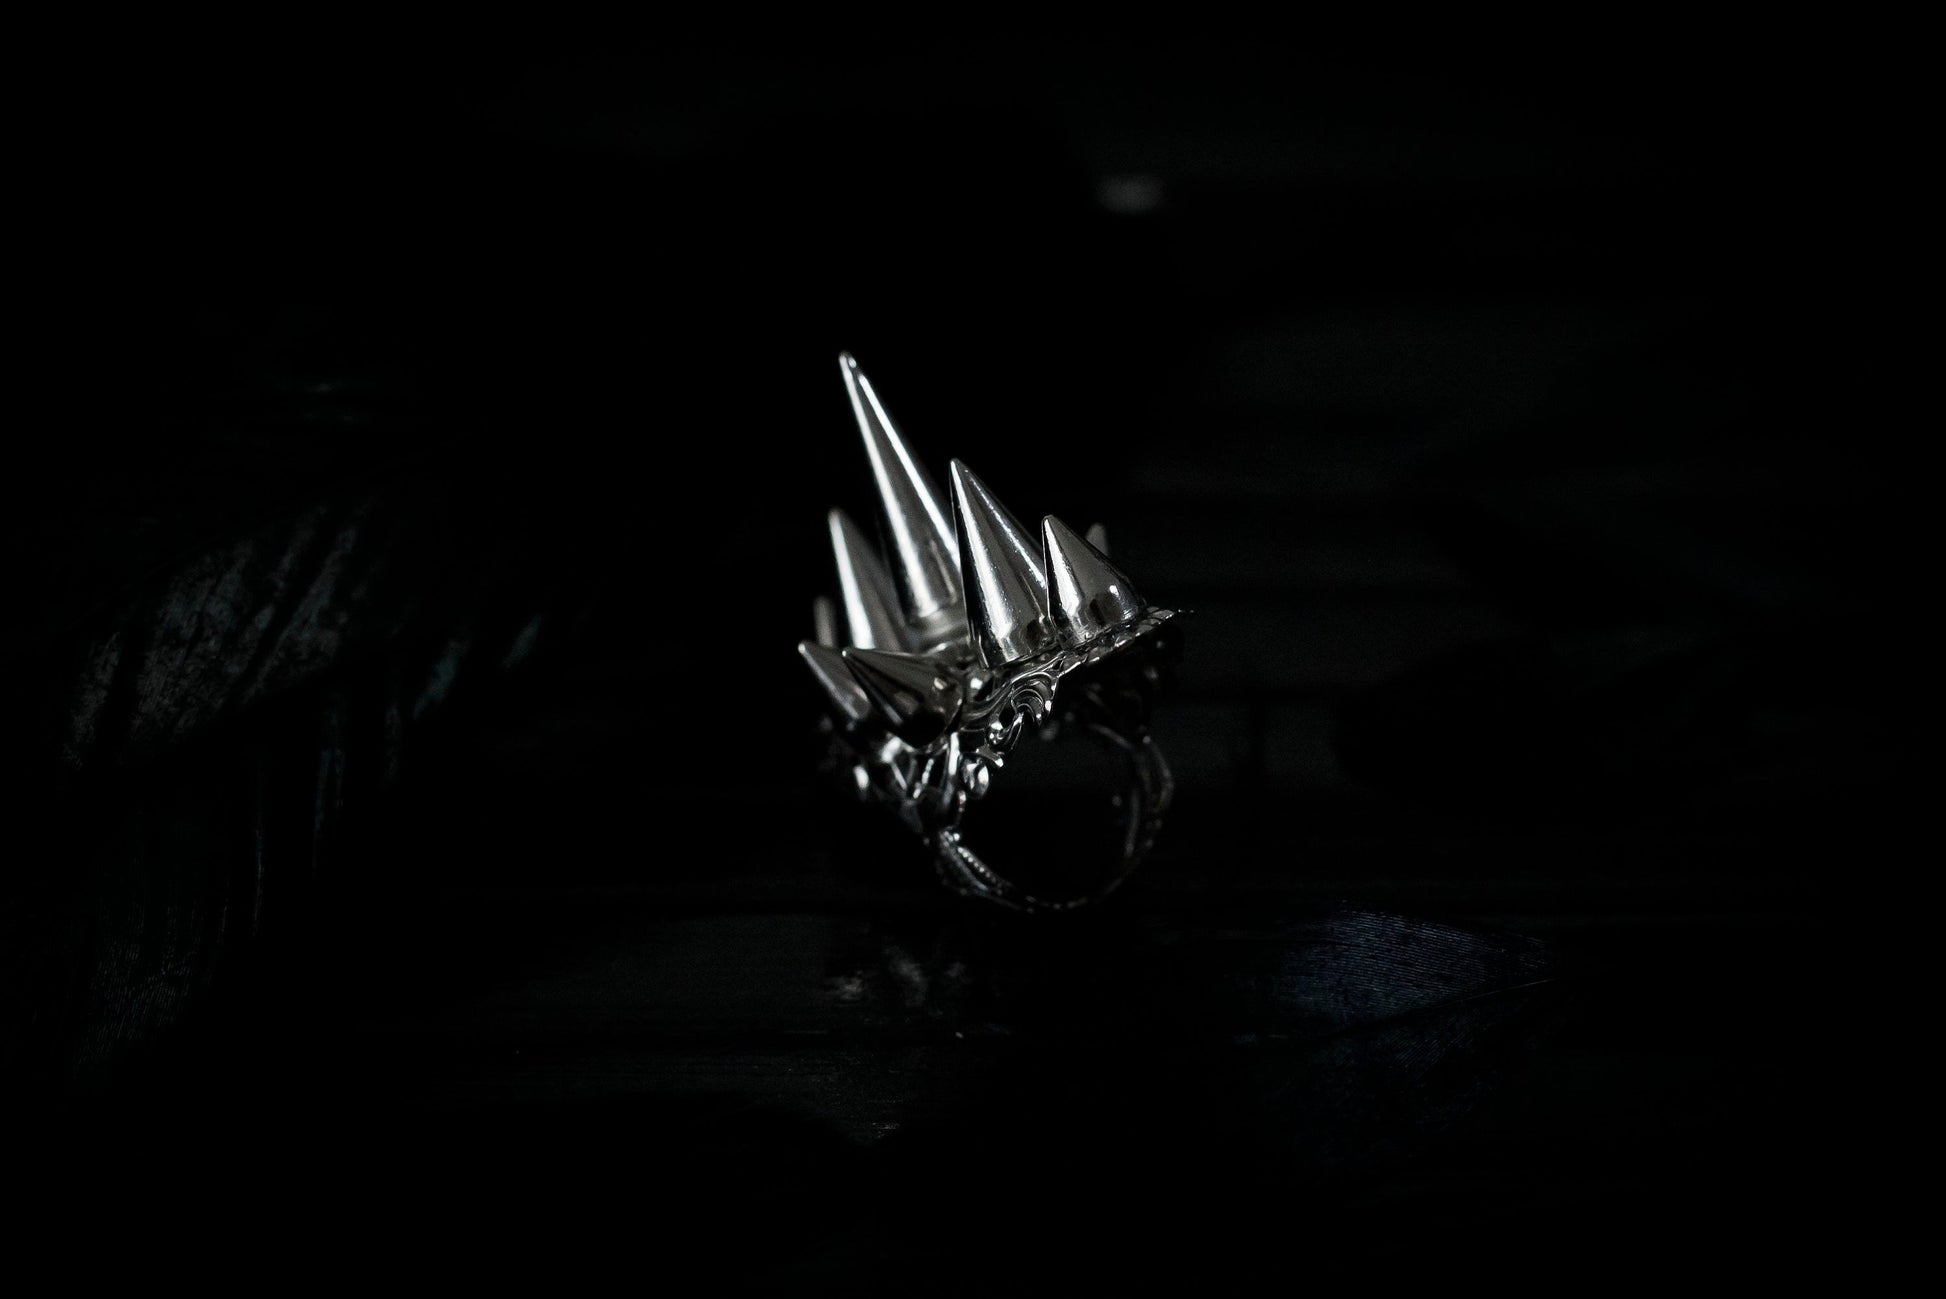 This bold Myril Jewels punk studded ring stands out with its gleaming silver spikes and intricate filigree detailing that pays homage to Neo Gothic craftsmanship. Perfect for anyone seeking a statement piece that channels Gothic-chic or Witchcore vibes, the ring is a quintessential accessory for Halloween, dramatic everyday wear, and a striking complement to any minimal goth or Whimsigoth inspired outfit.